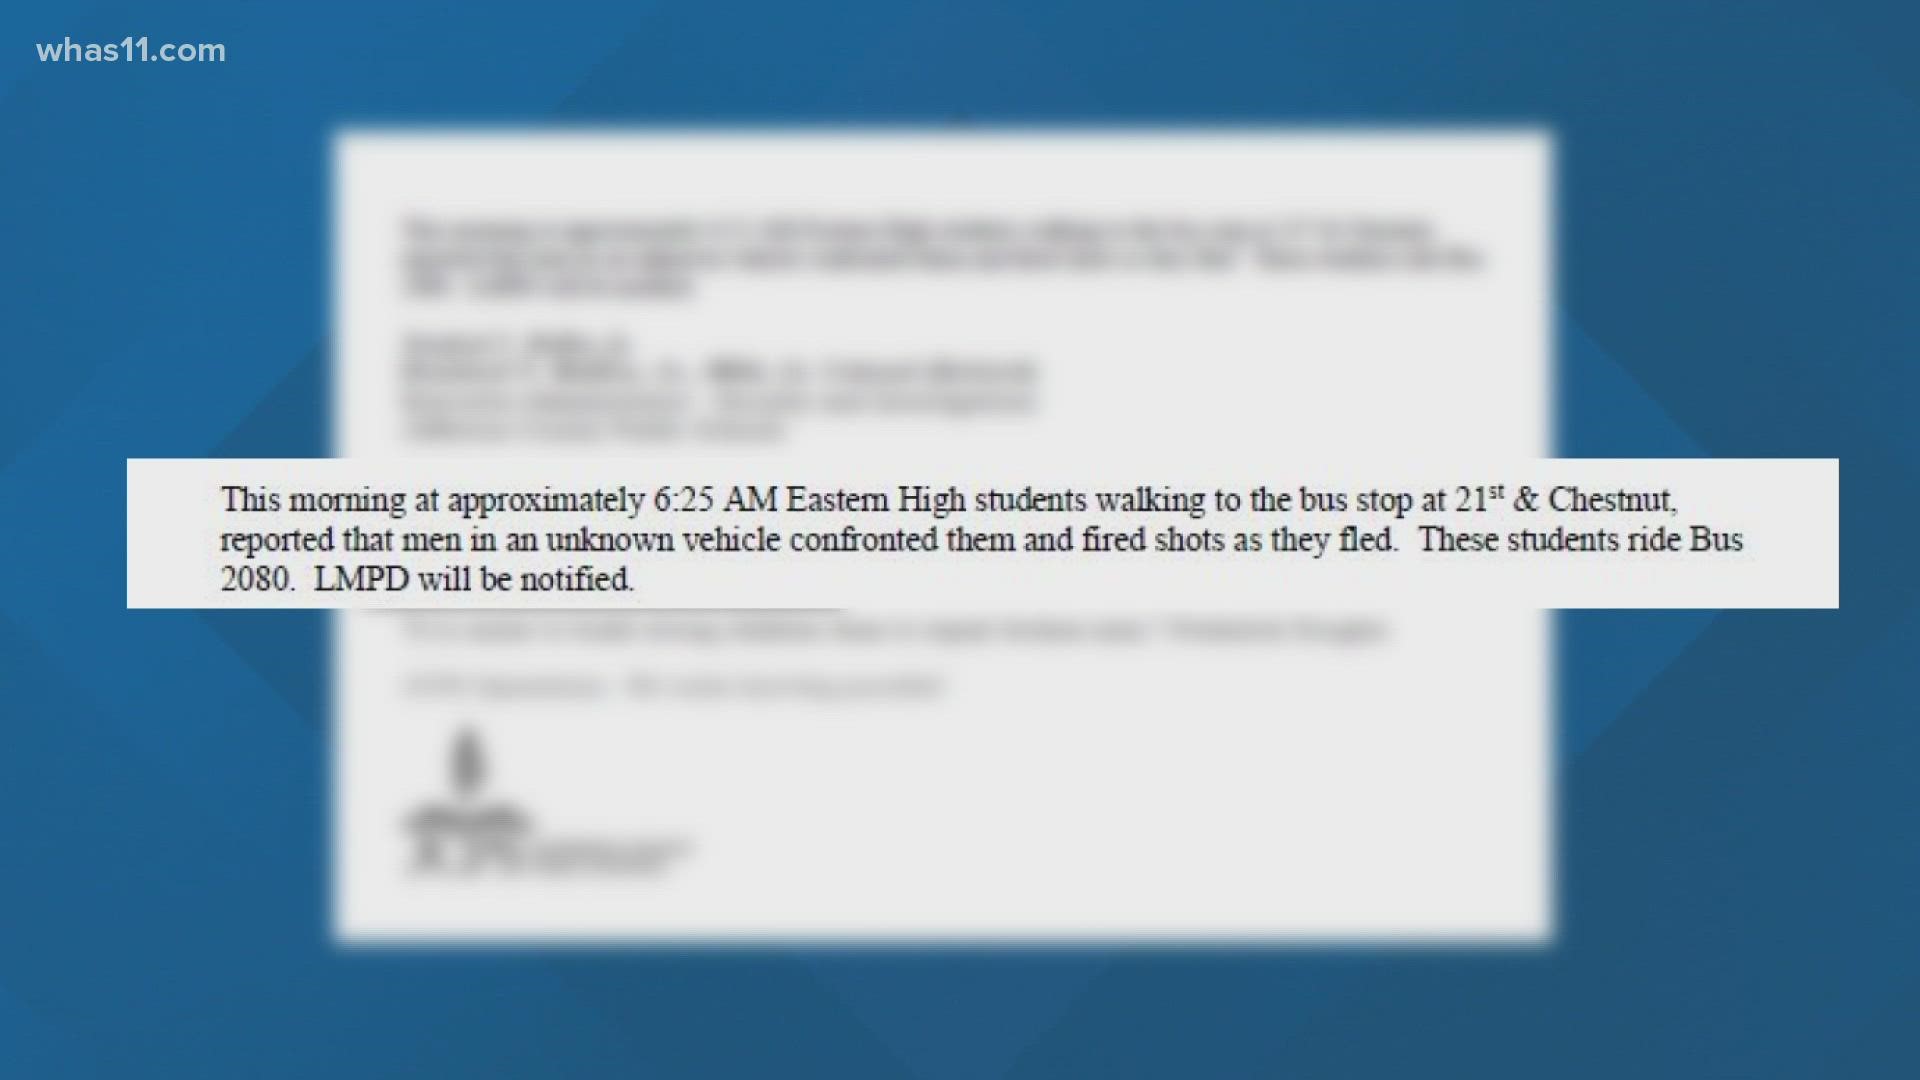 Emails by JCPS officials, acquired through an Open Records Request, say Eastern students told the school that shots were fired near the bus stop on September 7.